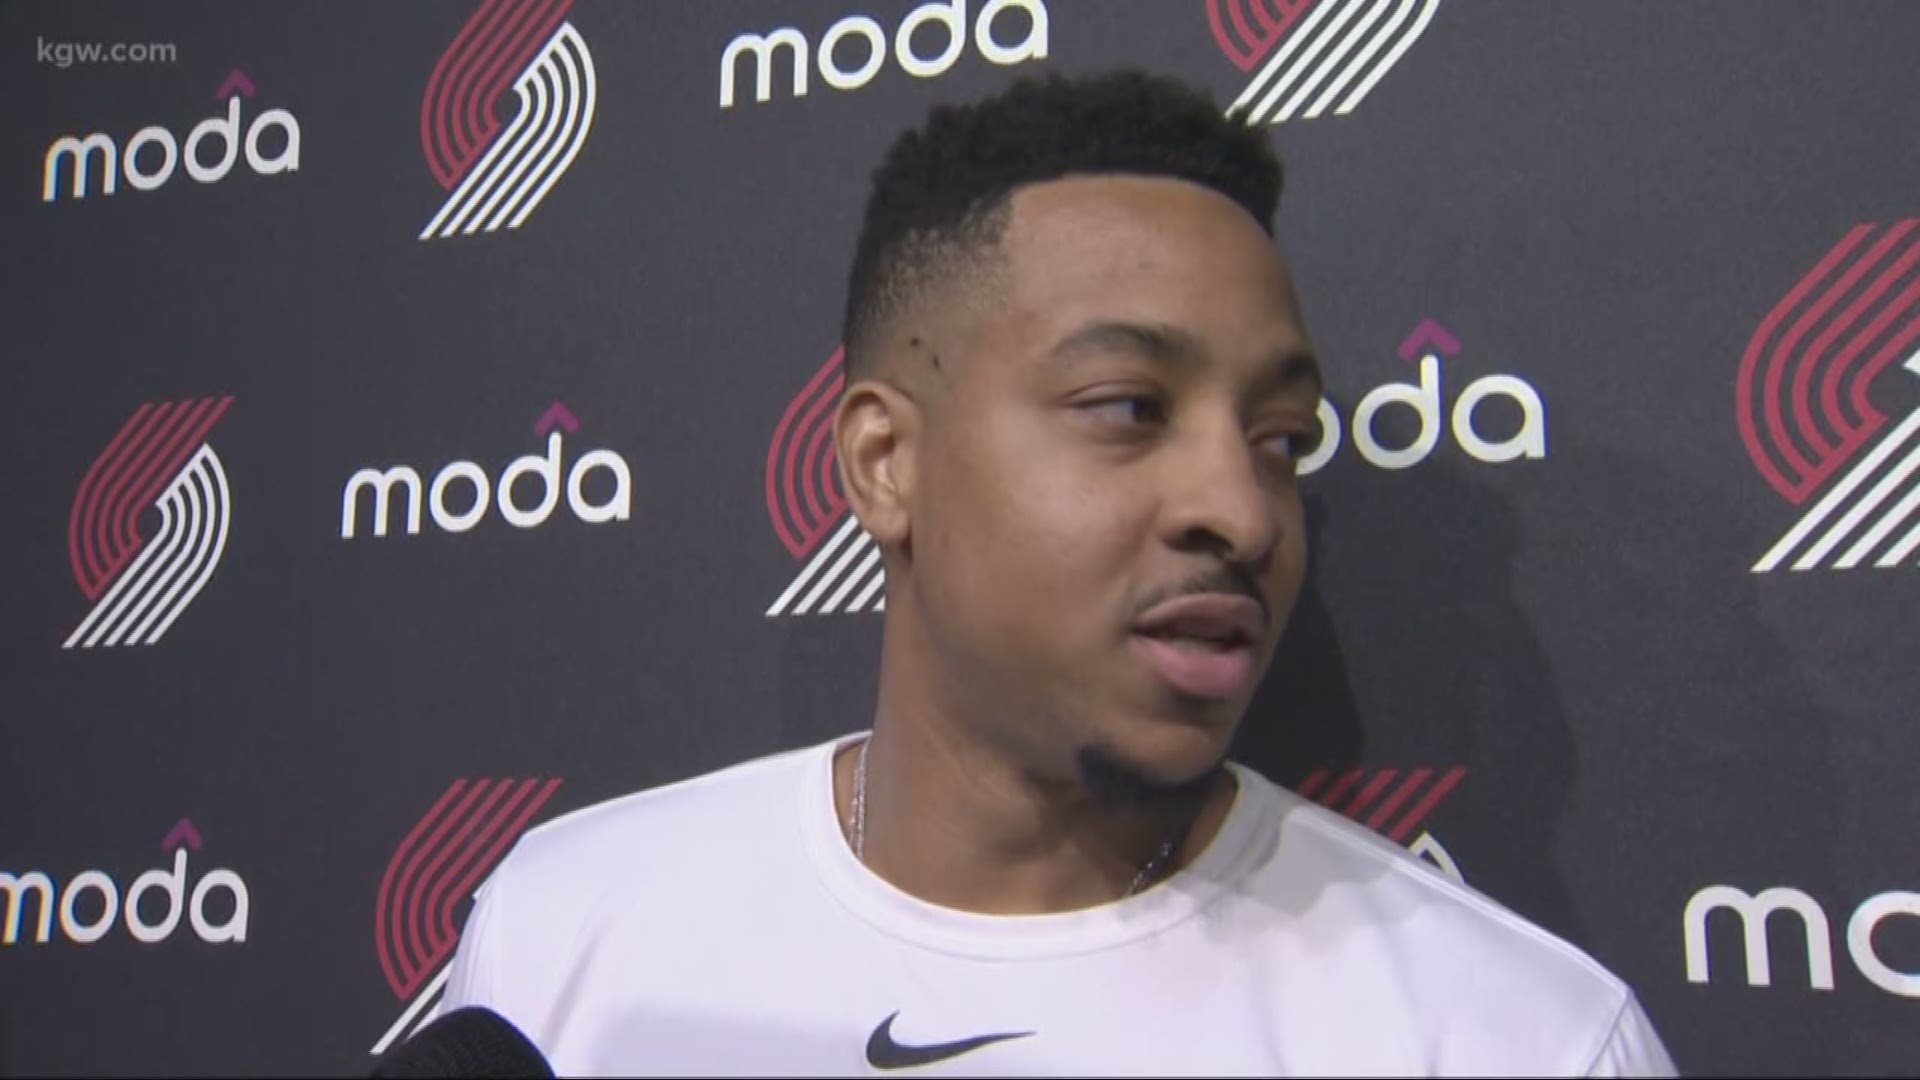 CJ McCollum spoke about his injury against the Spurs.